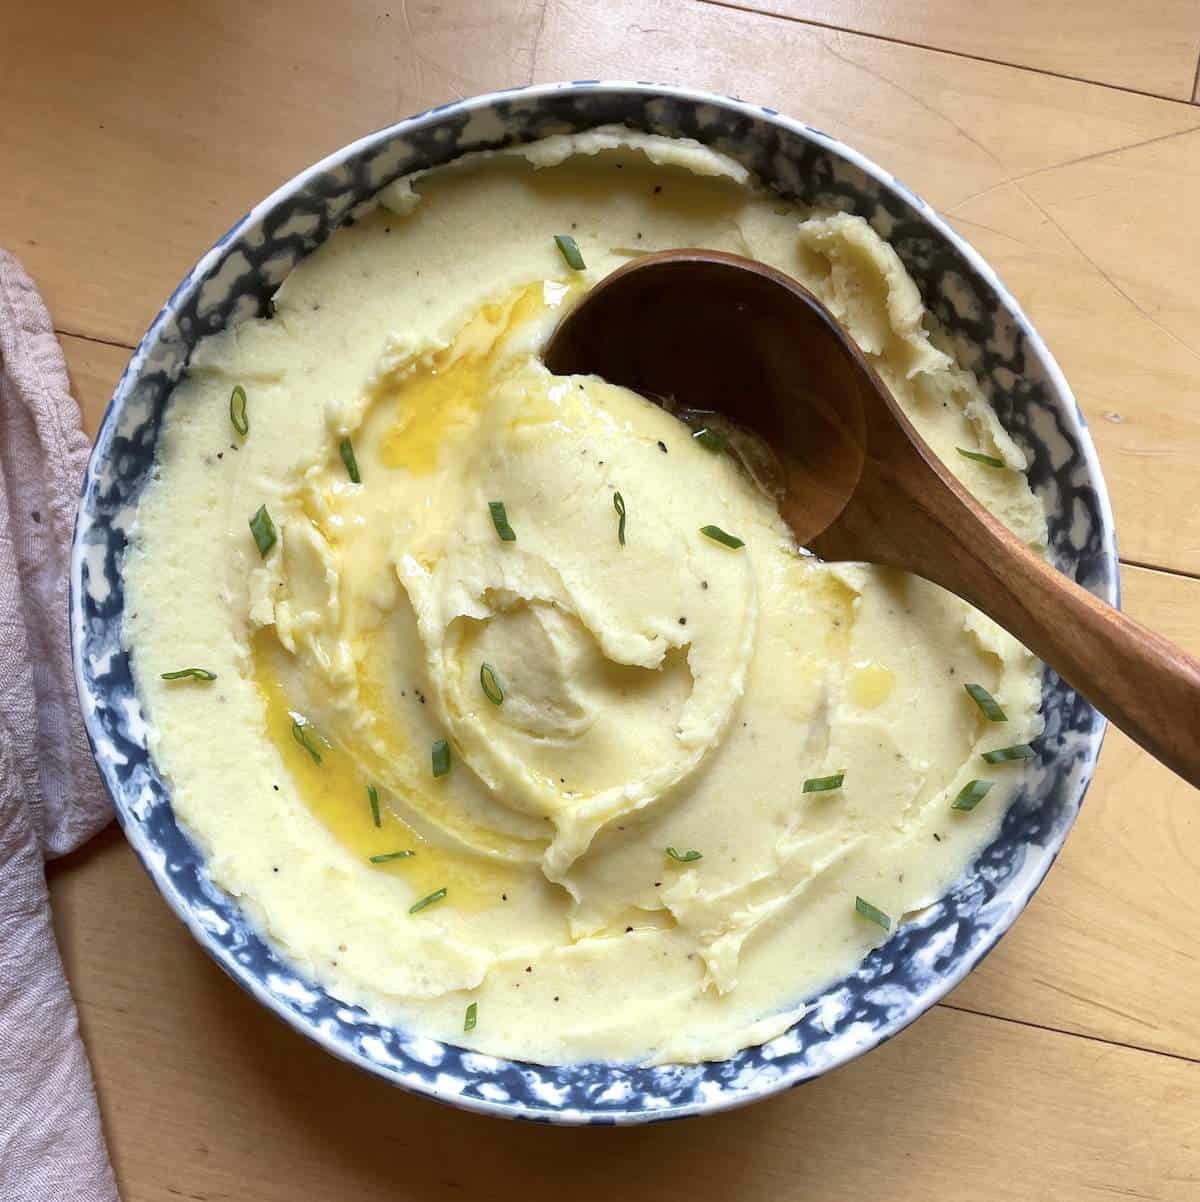 A blue bowl of buttermilk mashed potatoes with melted butter on top with a wooden serving spoon resting in it.